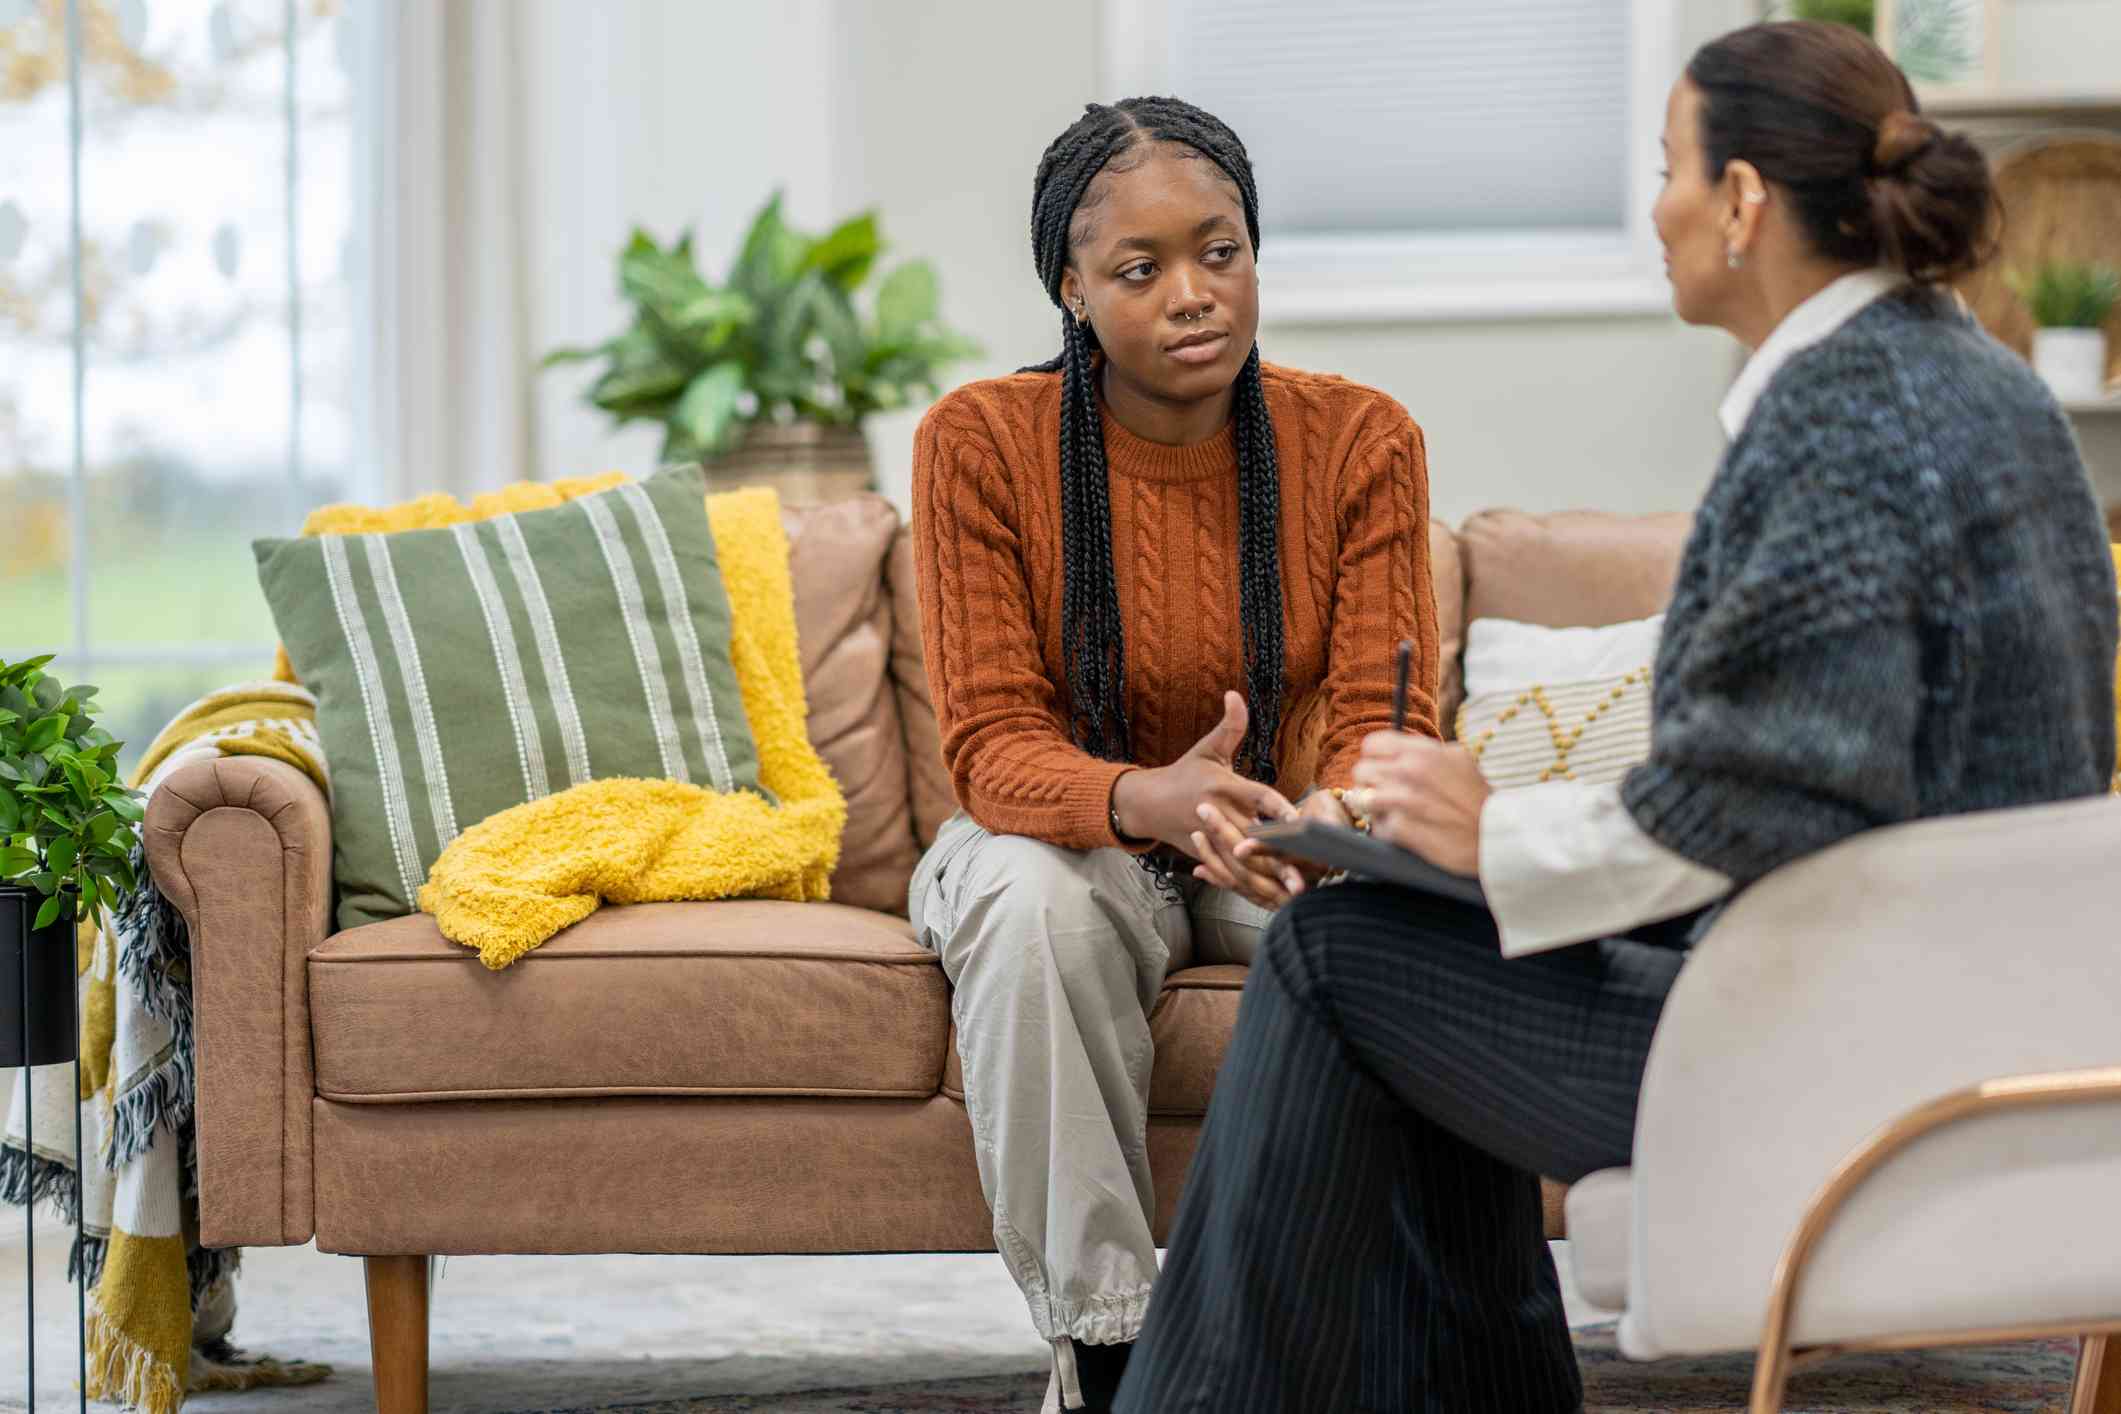 A woman in an orange sweater sits on a couch and talks to her female therapist with a serious expression during a therapy session.